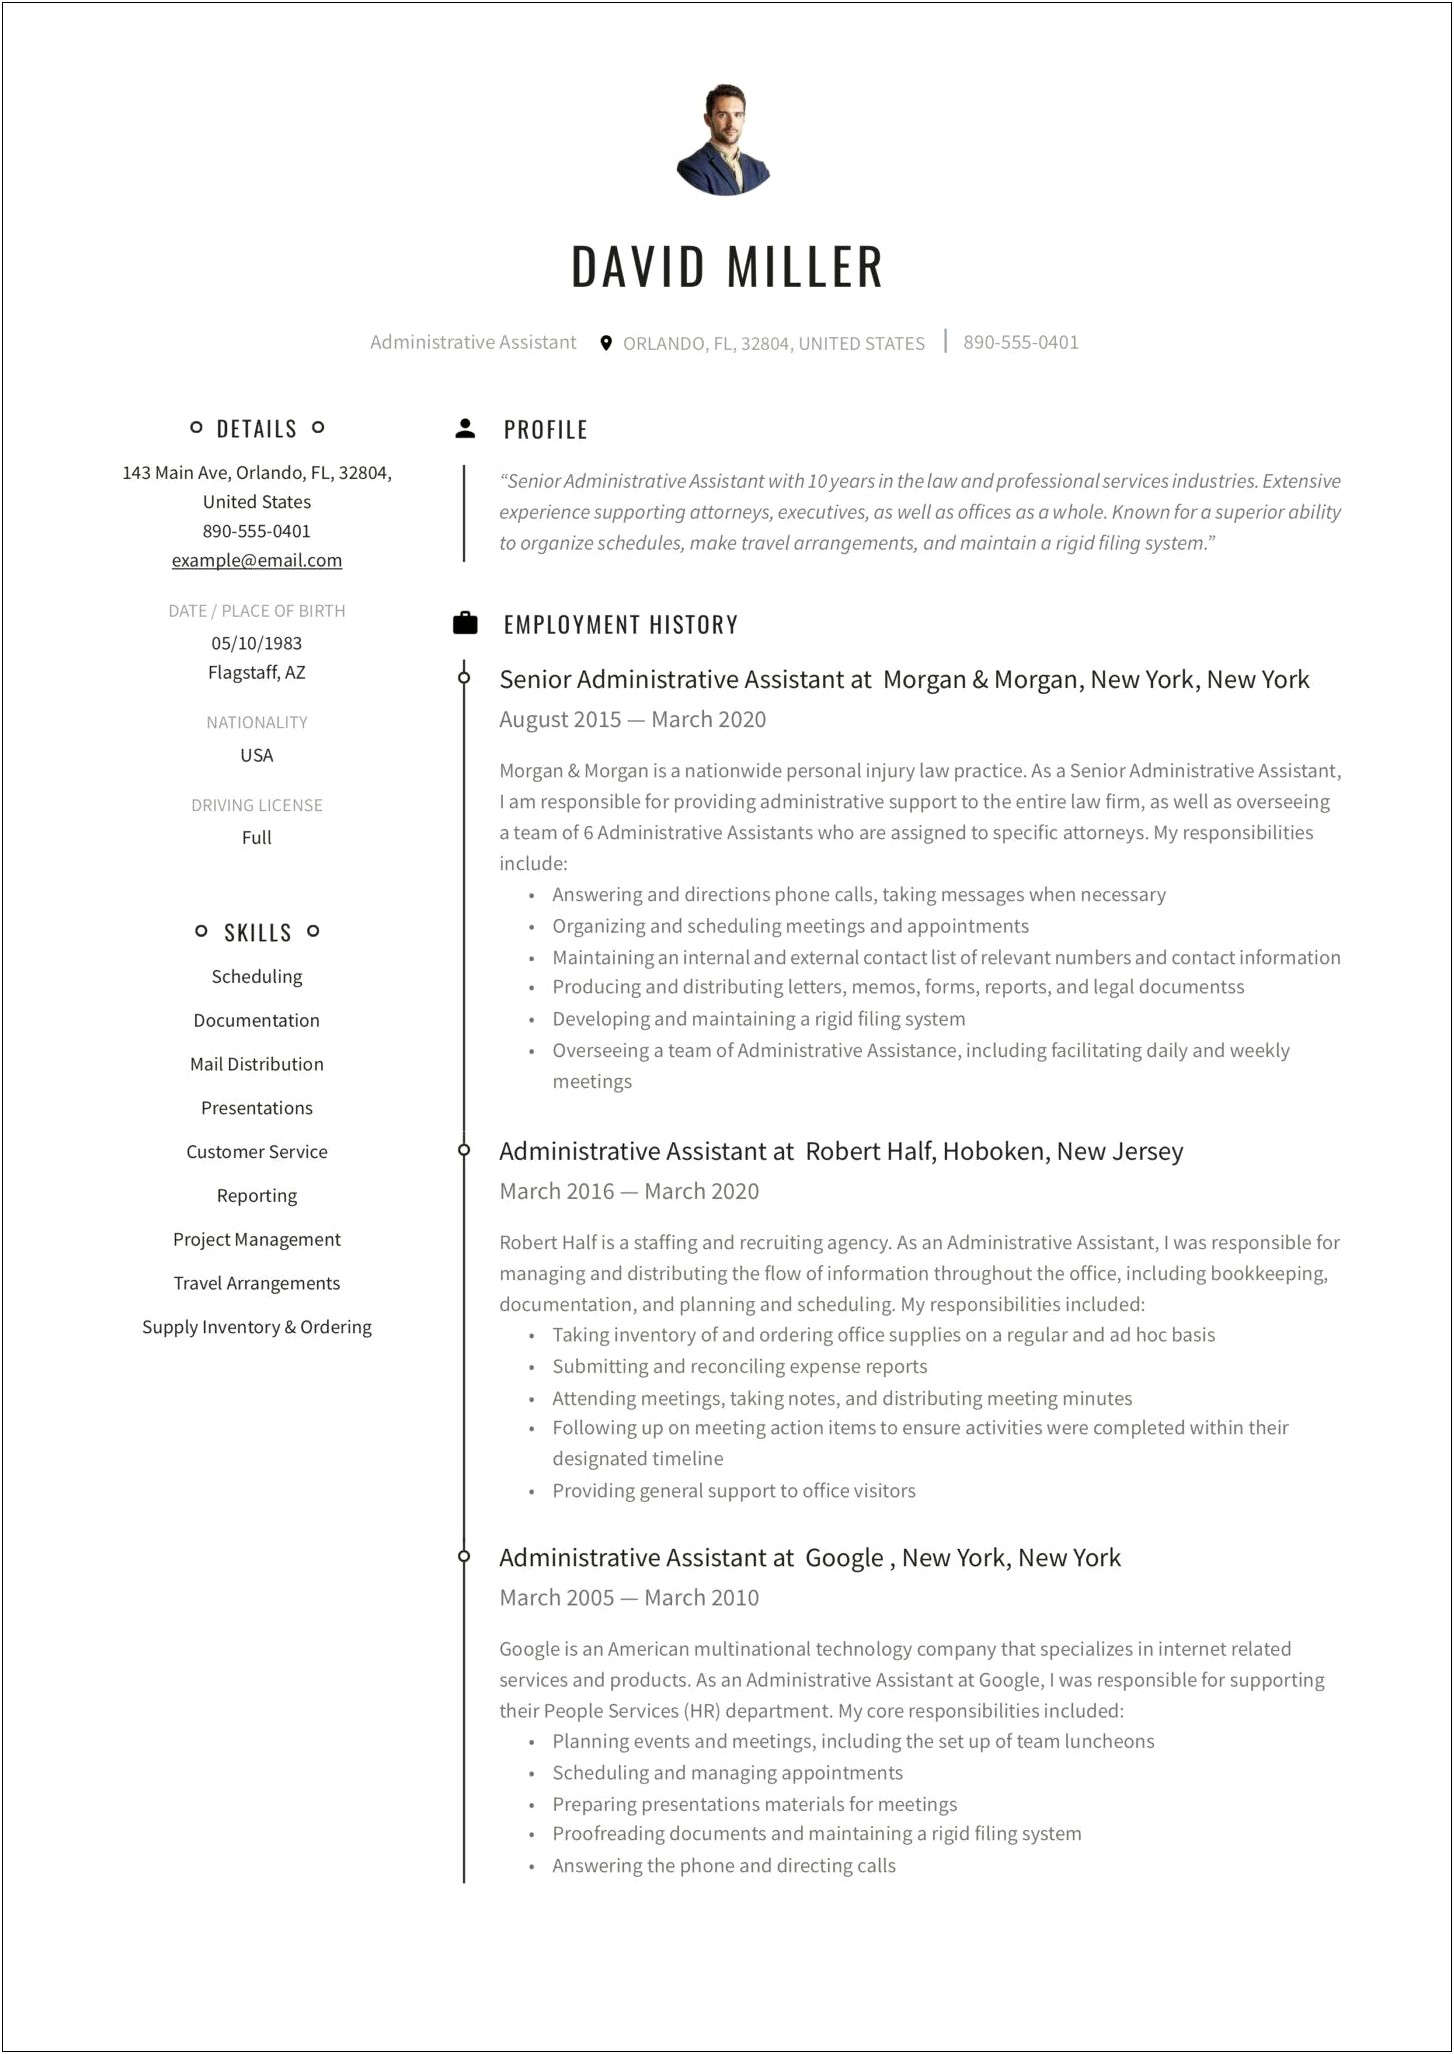 Professional Summary For Administrative Assistant Resume